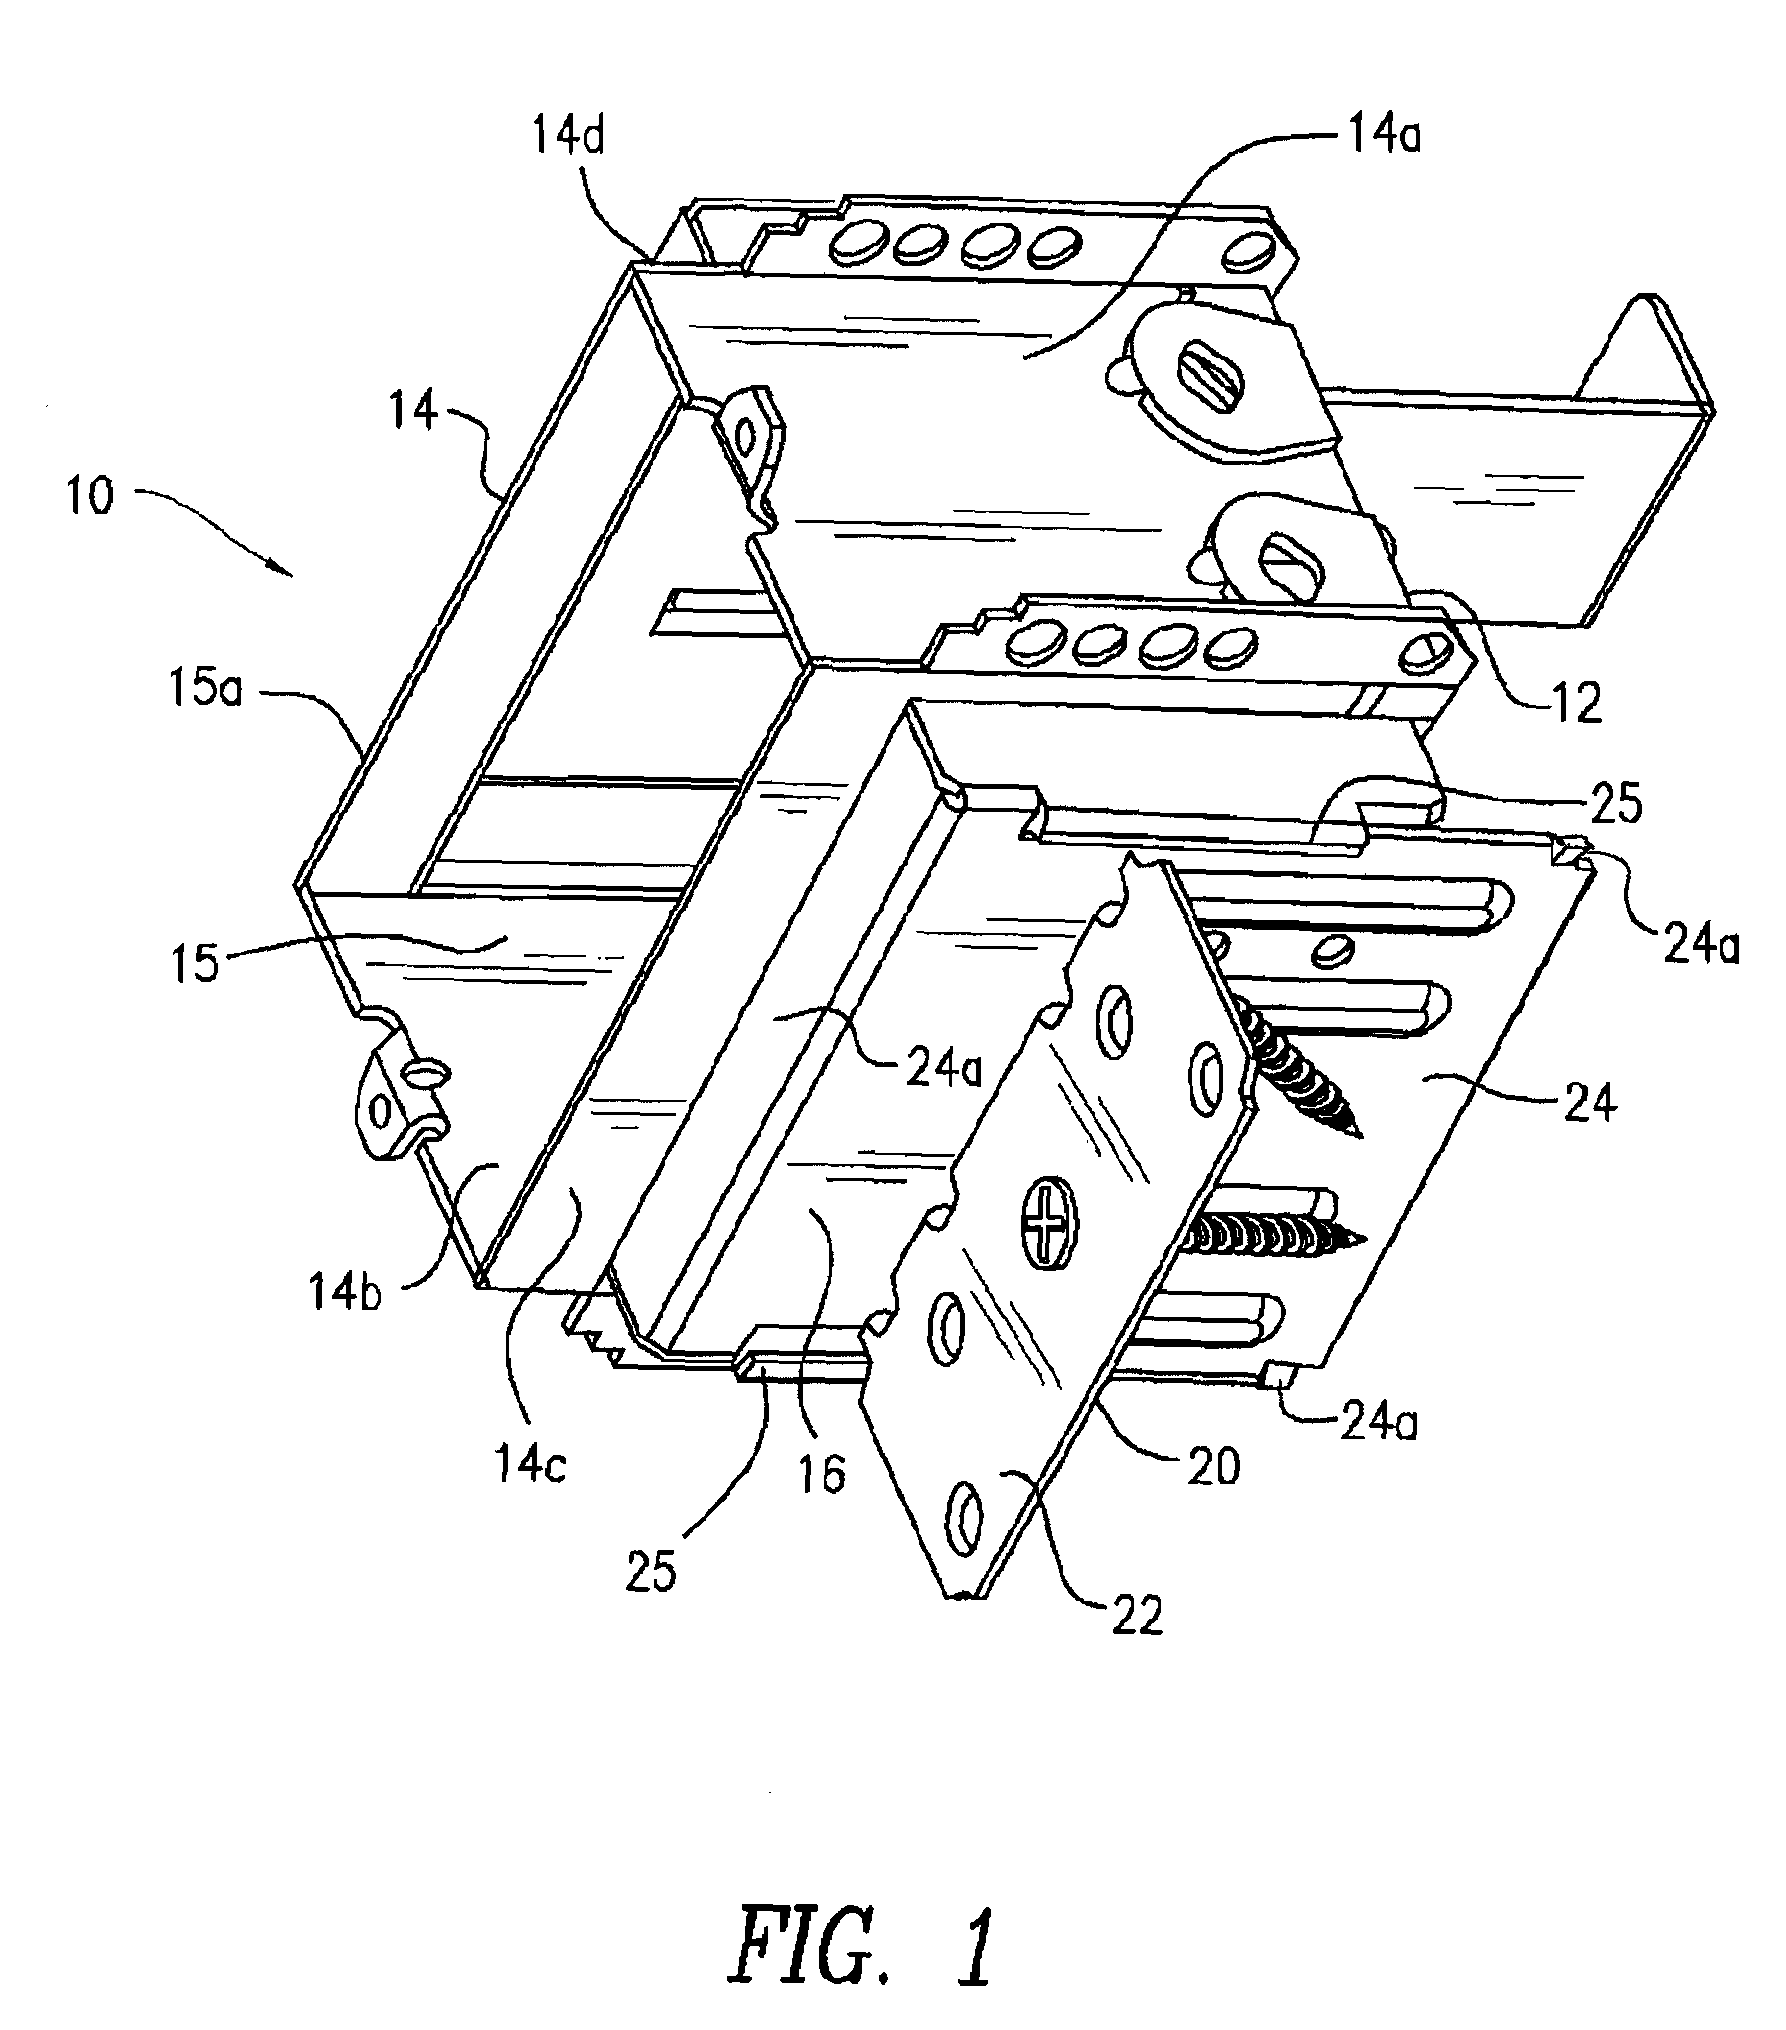 Electrical outlet box assembly for adjustable positioning with respect to a stud